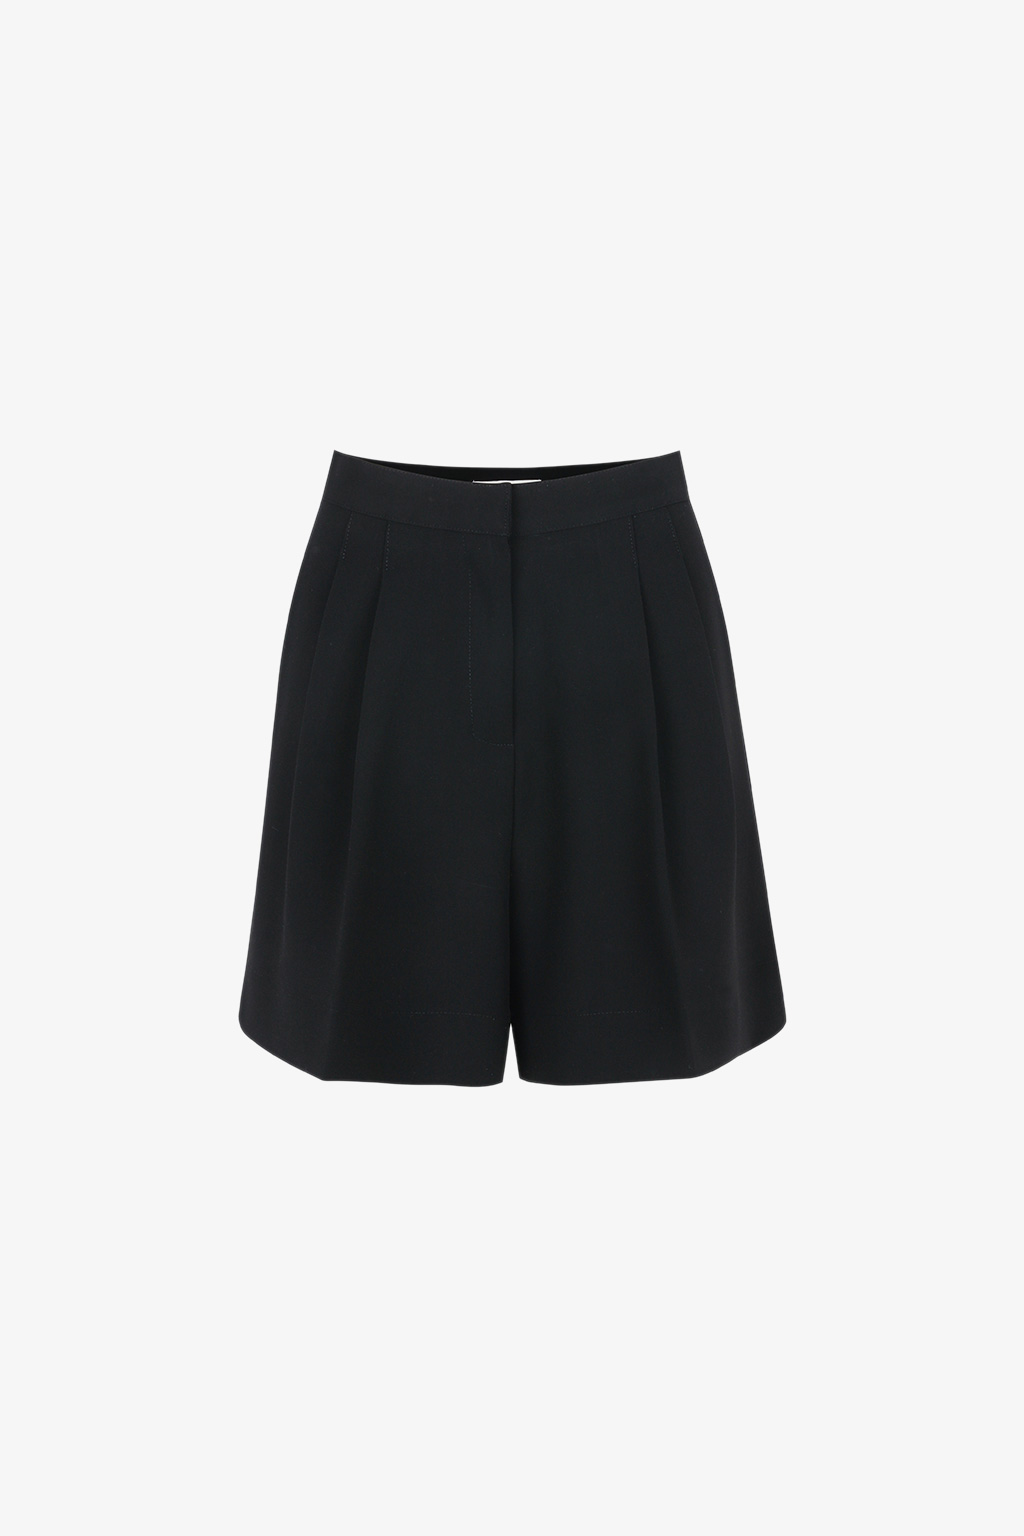 [ASTIER] fave shorts - 3차